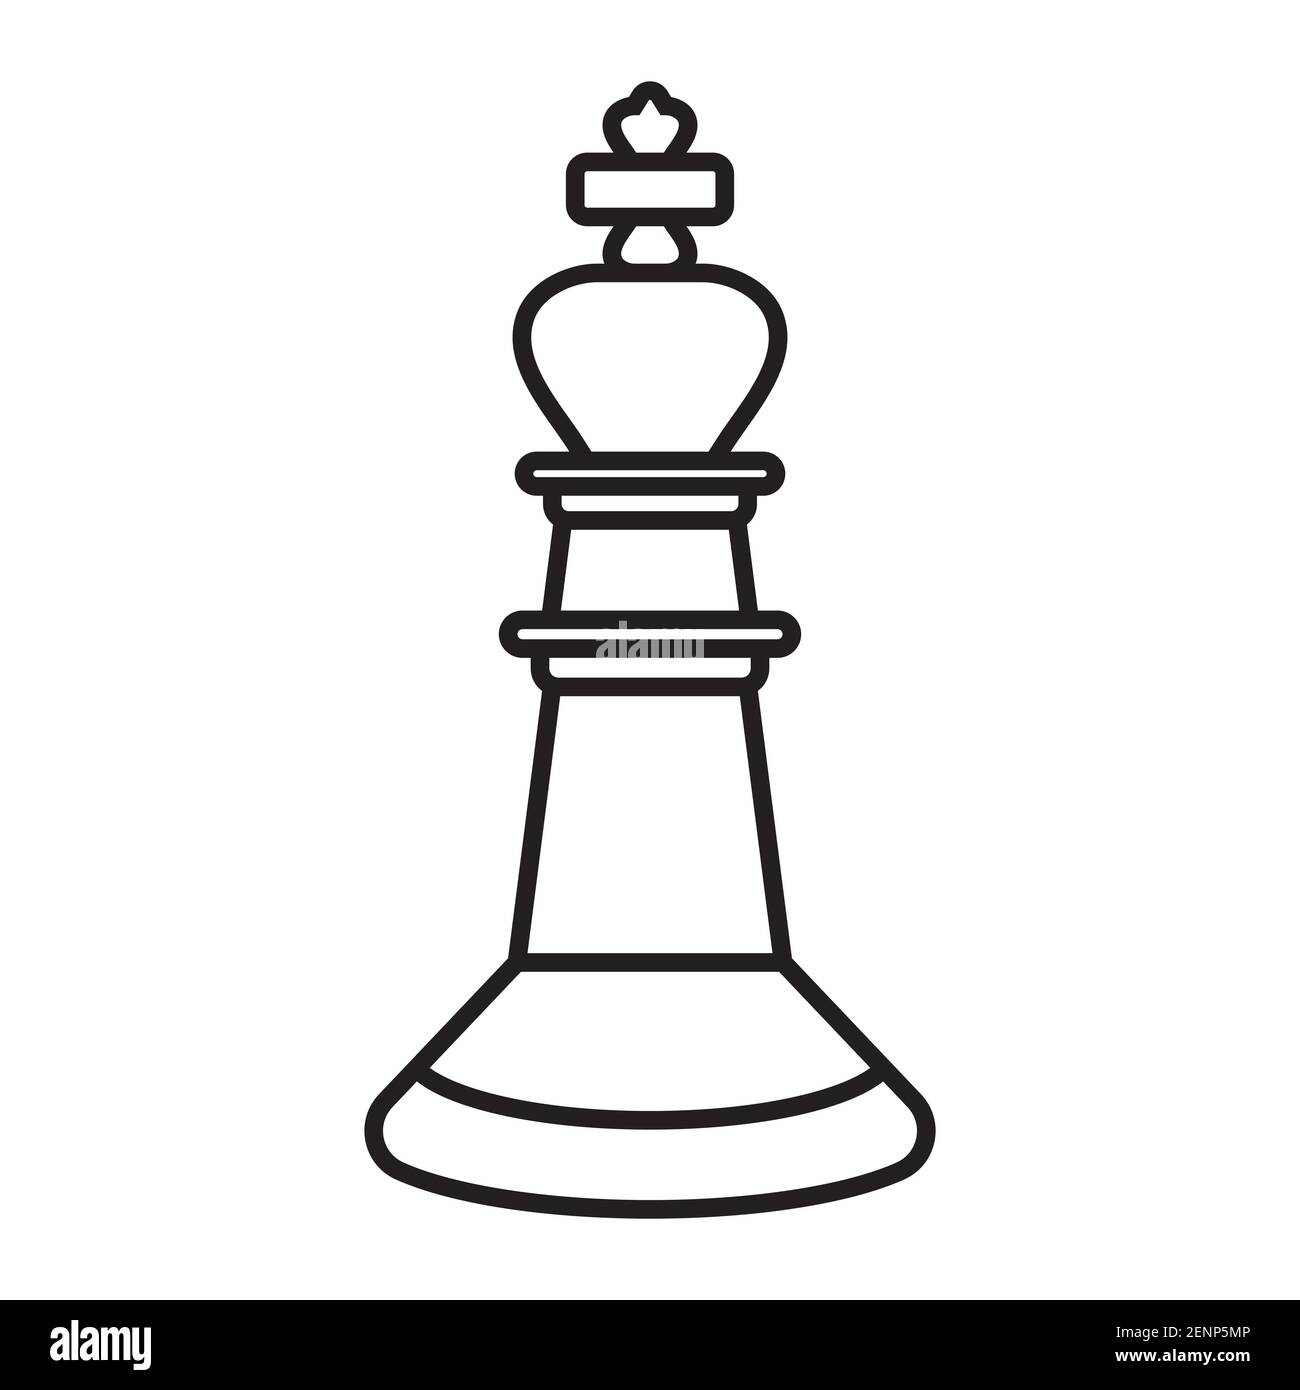 King chess piece line art icon for apps or website Stock Vector Image ...